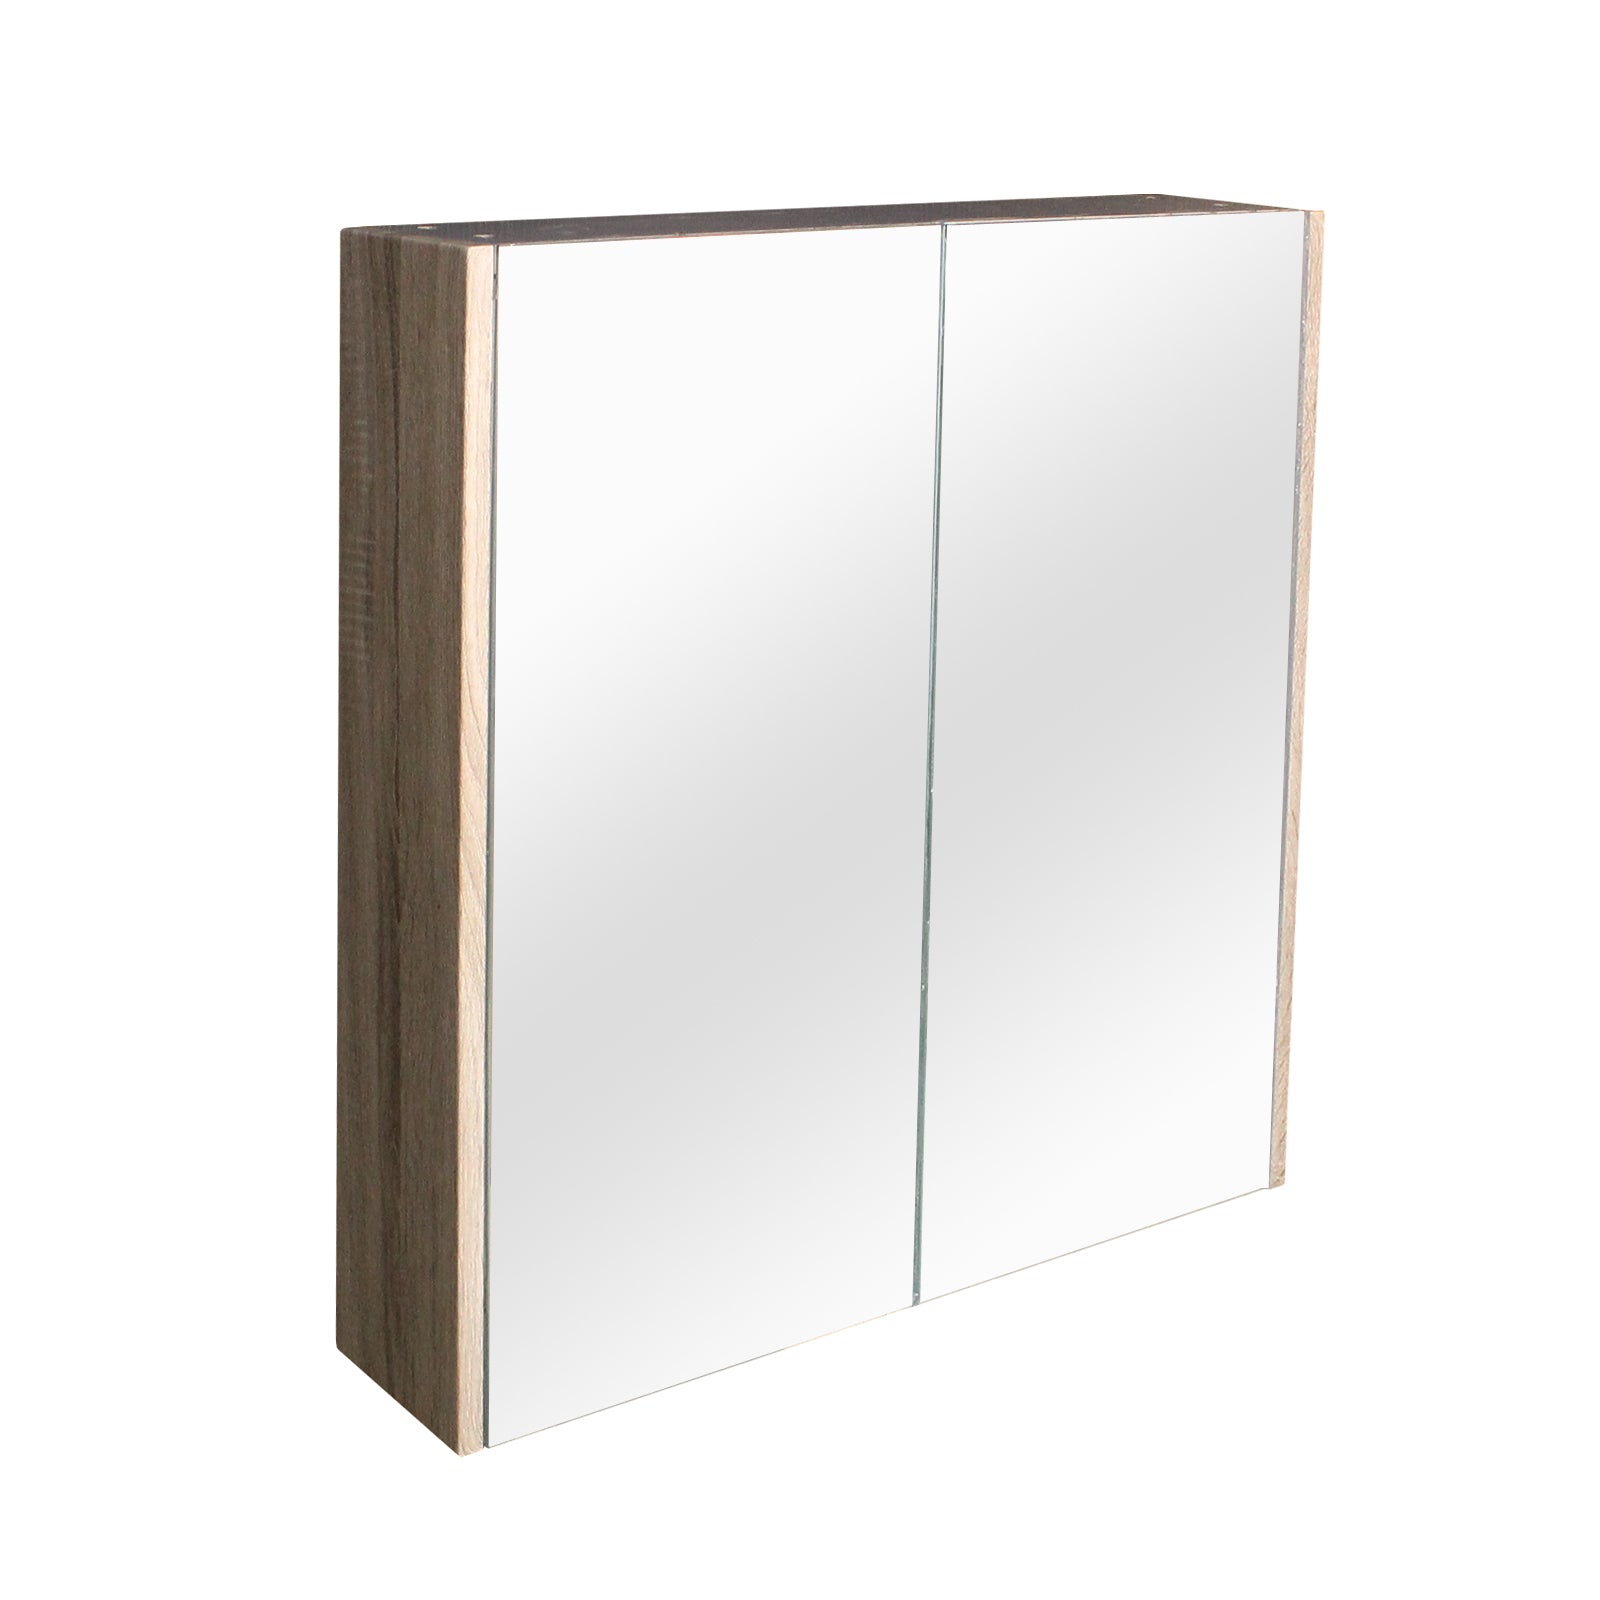 POSEIDON WHITE OAK QSVWO QUBIST MIRROR SHAVING CABINET (AVAILABLE IN 600MM, 750MM AND 900MM)